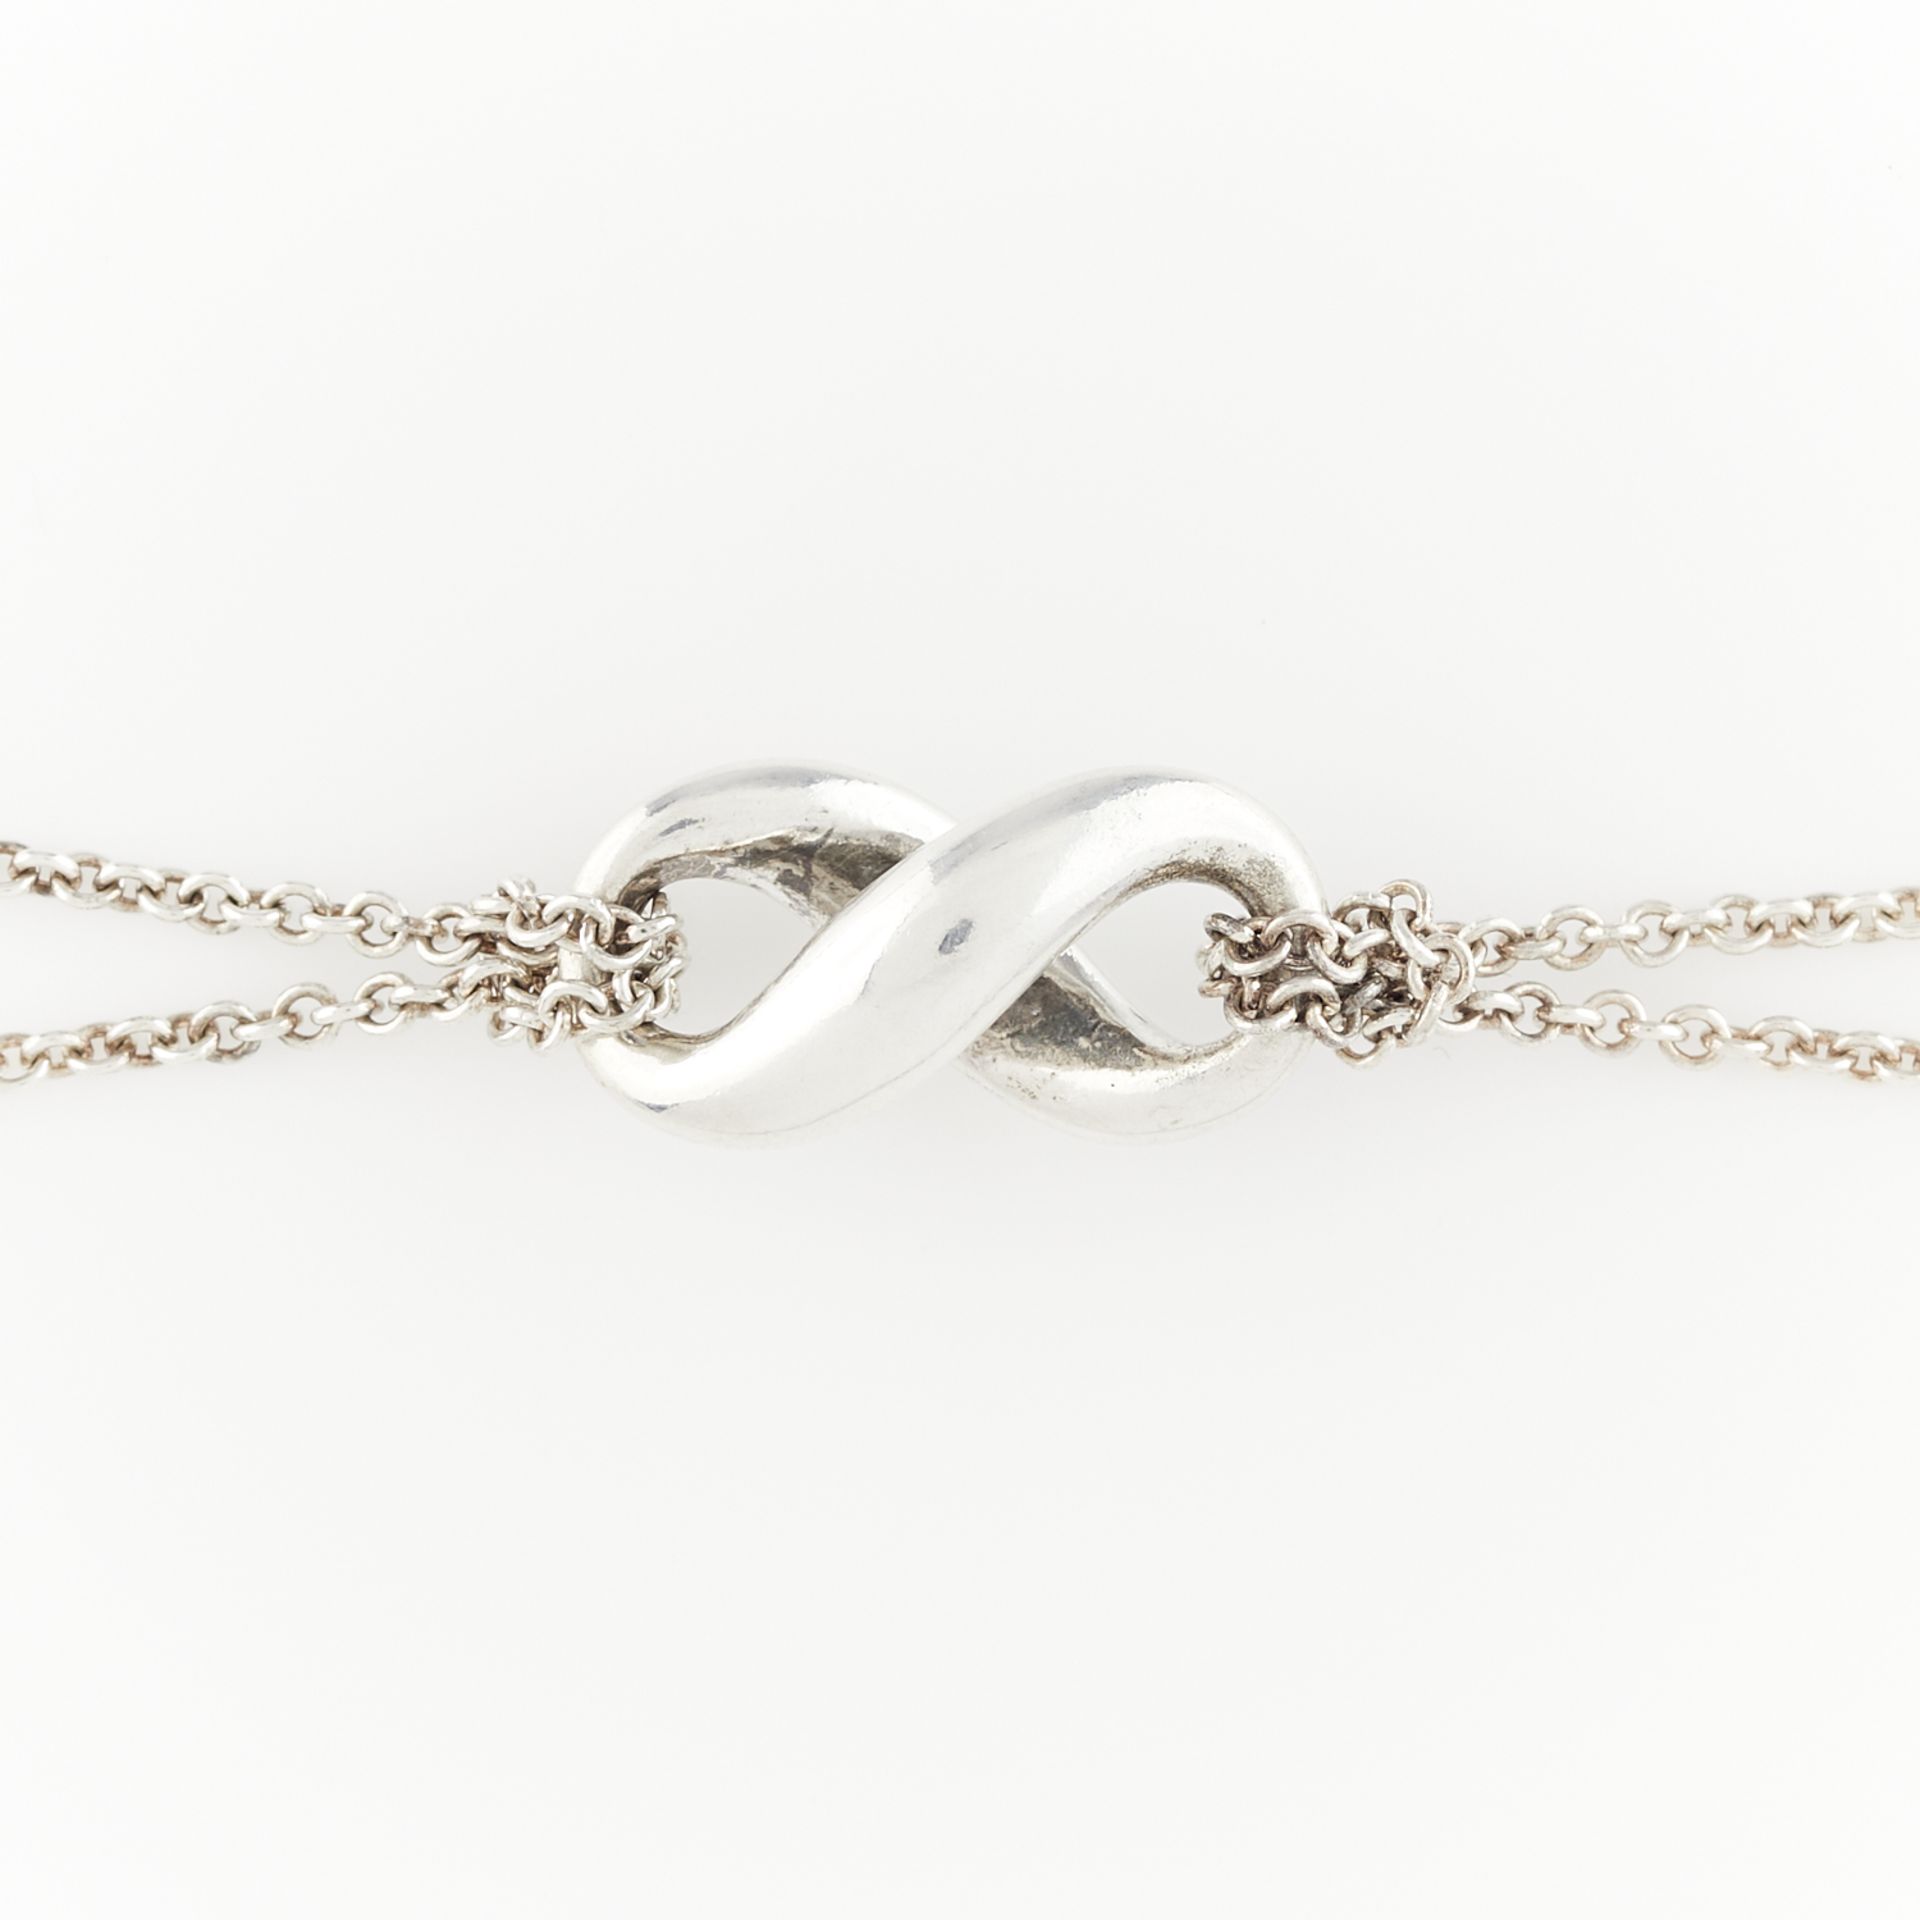 Tiffany & Co. Infinity Necklace - Image 3 of 8